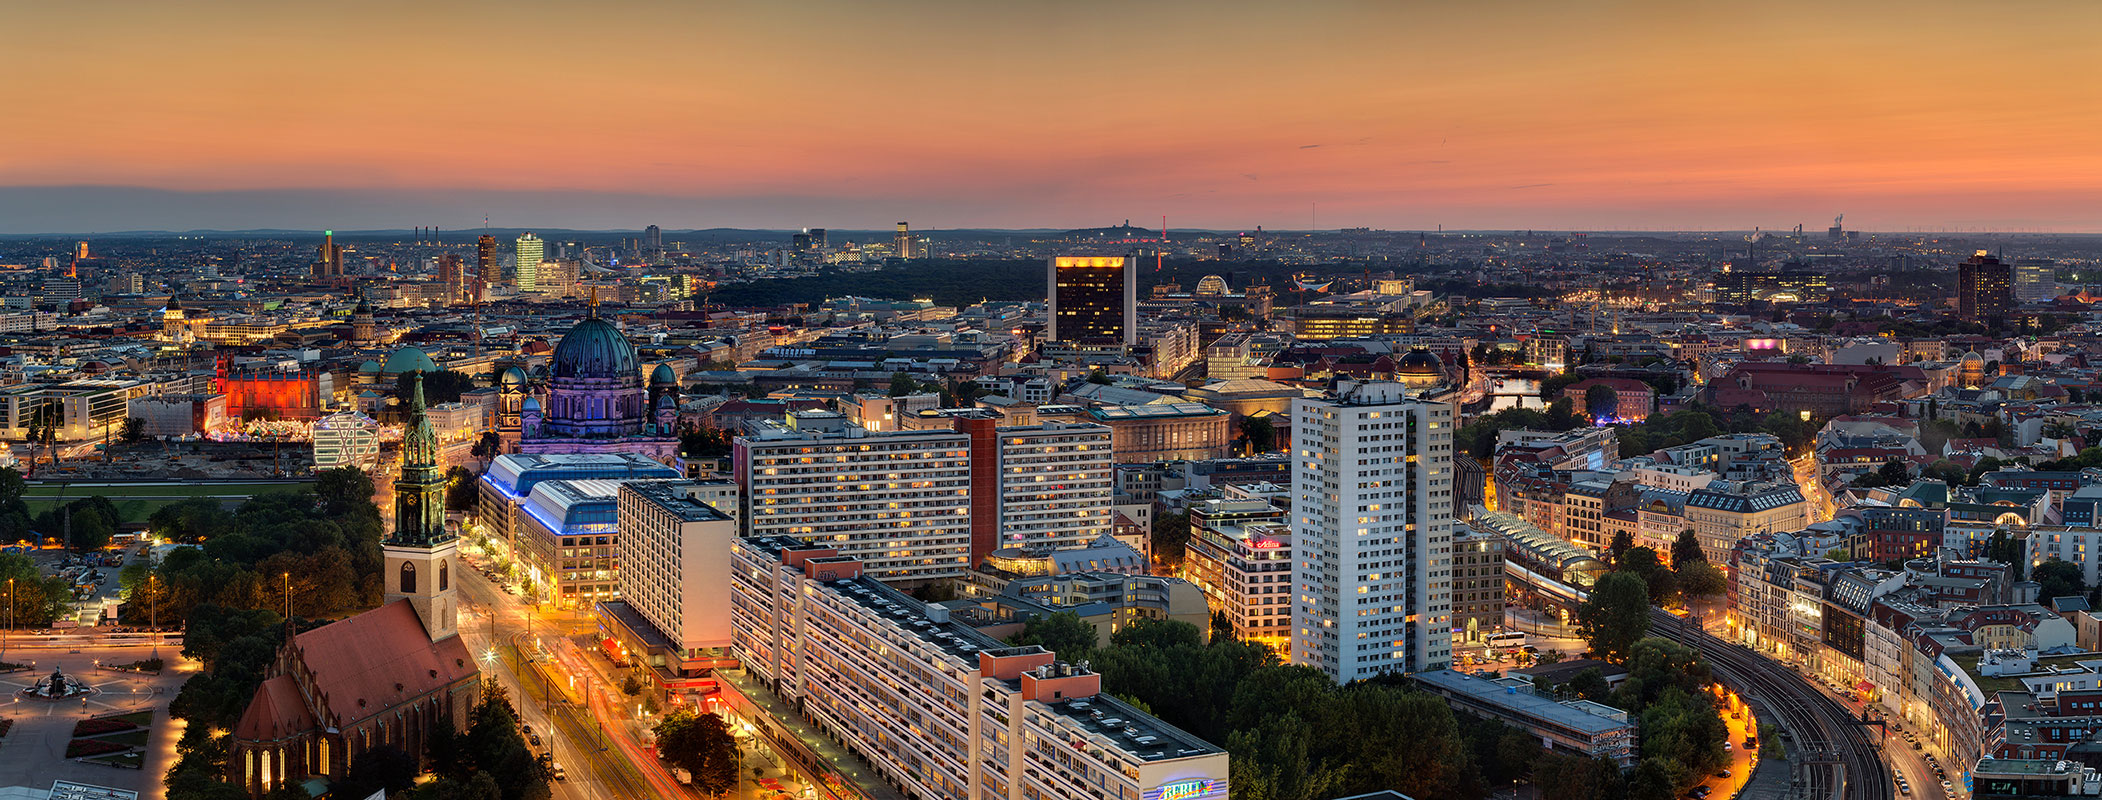 A panorama taken from the roof of my penthouse unit in the heart of Aarhus.